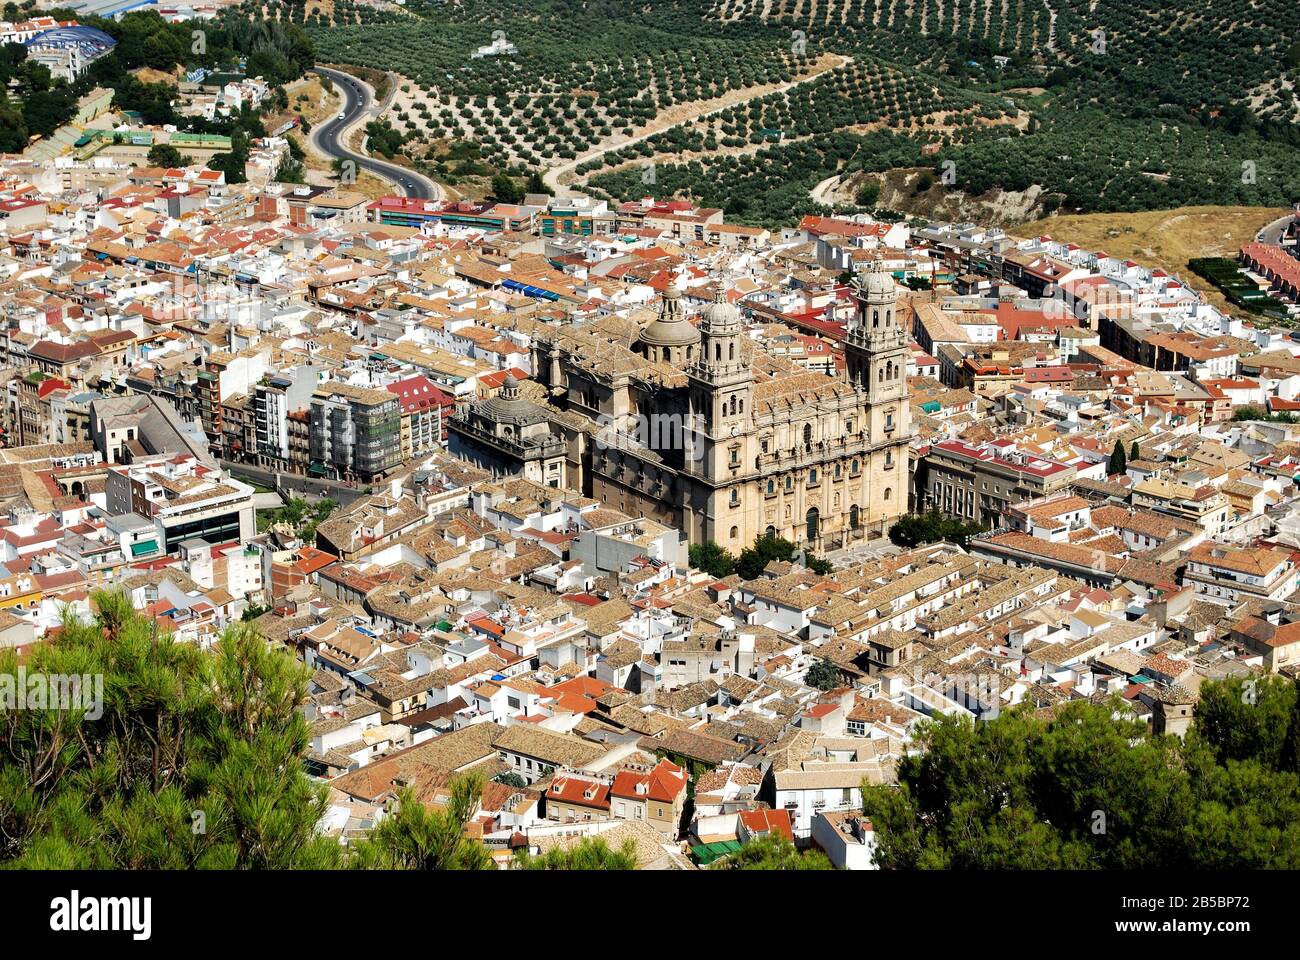 View across the city rooftops with the Cathedral in the centre, Jaen, Jaen Province, Andalucia, Spain, Western Europe. Stock Photo